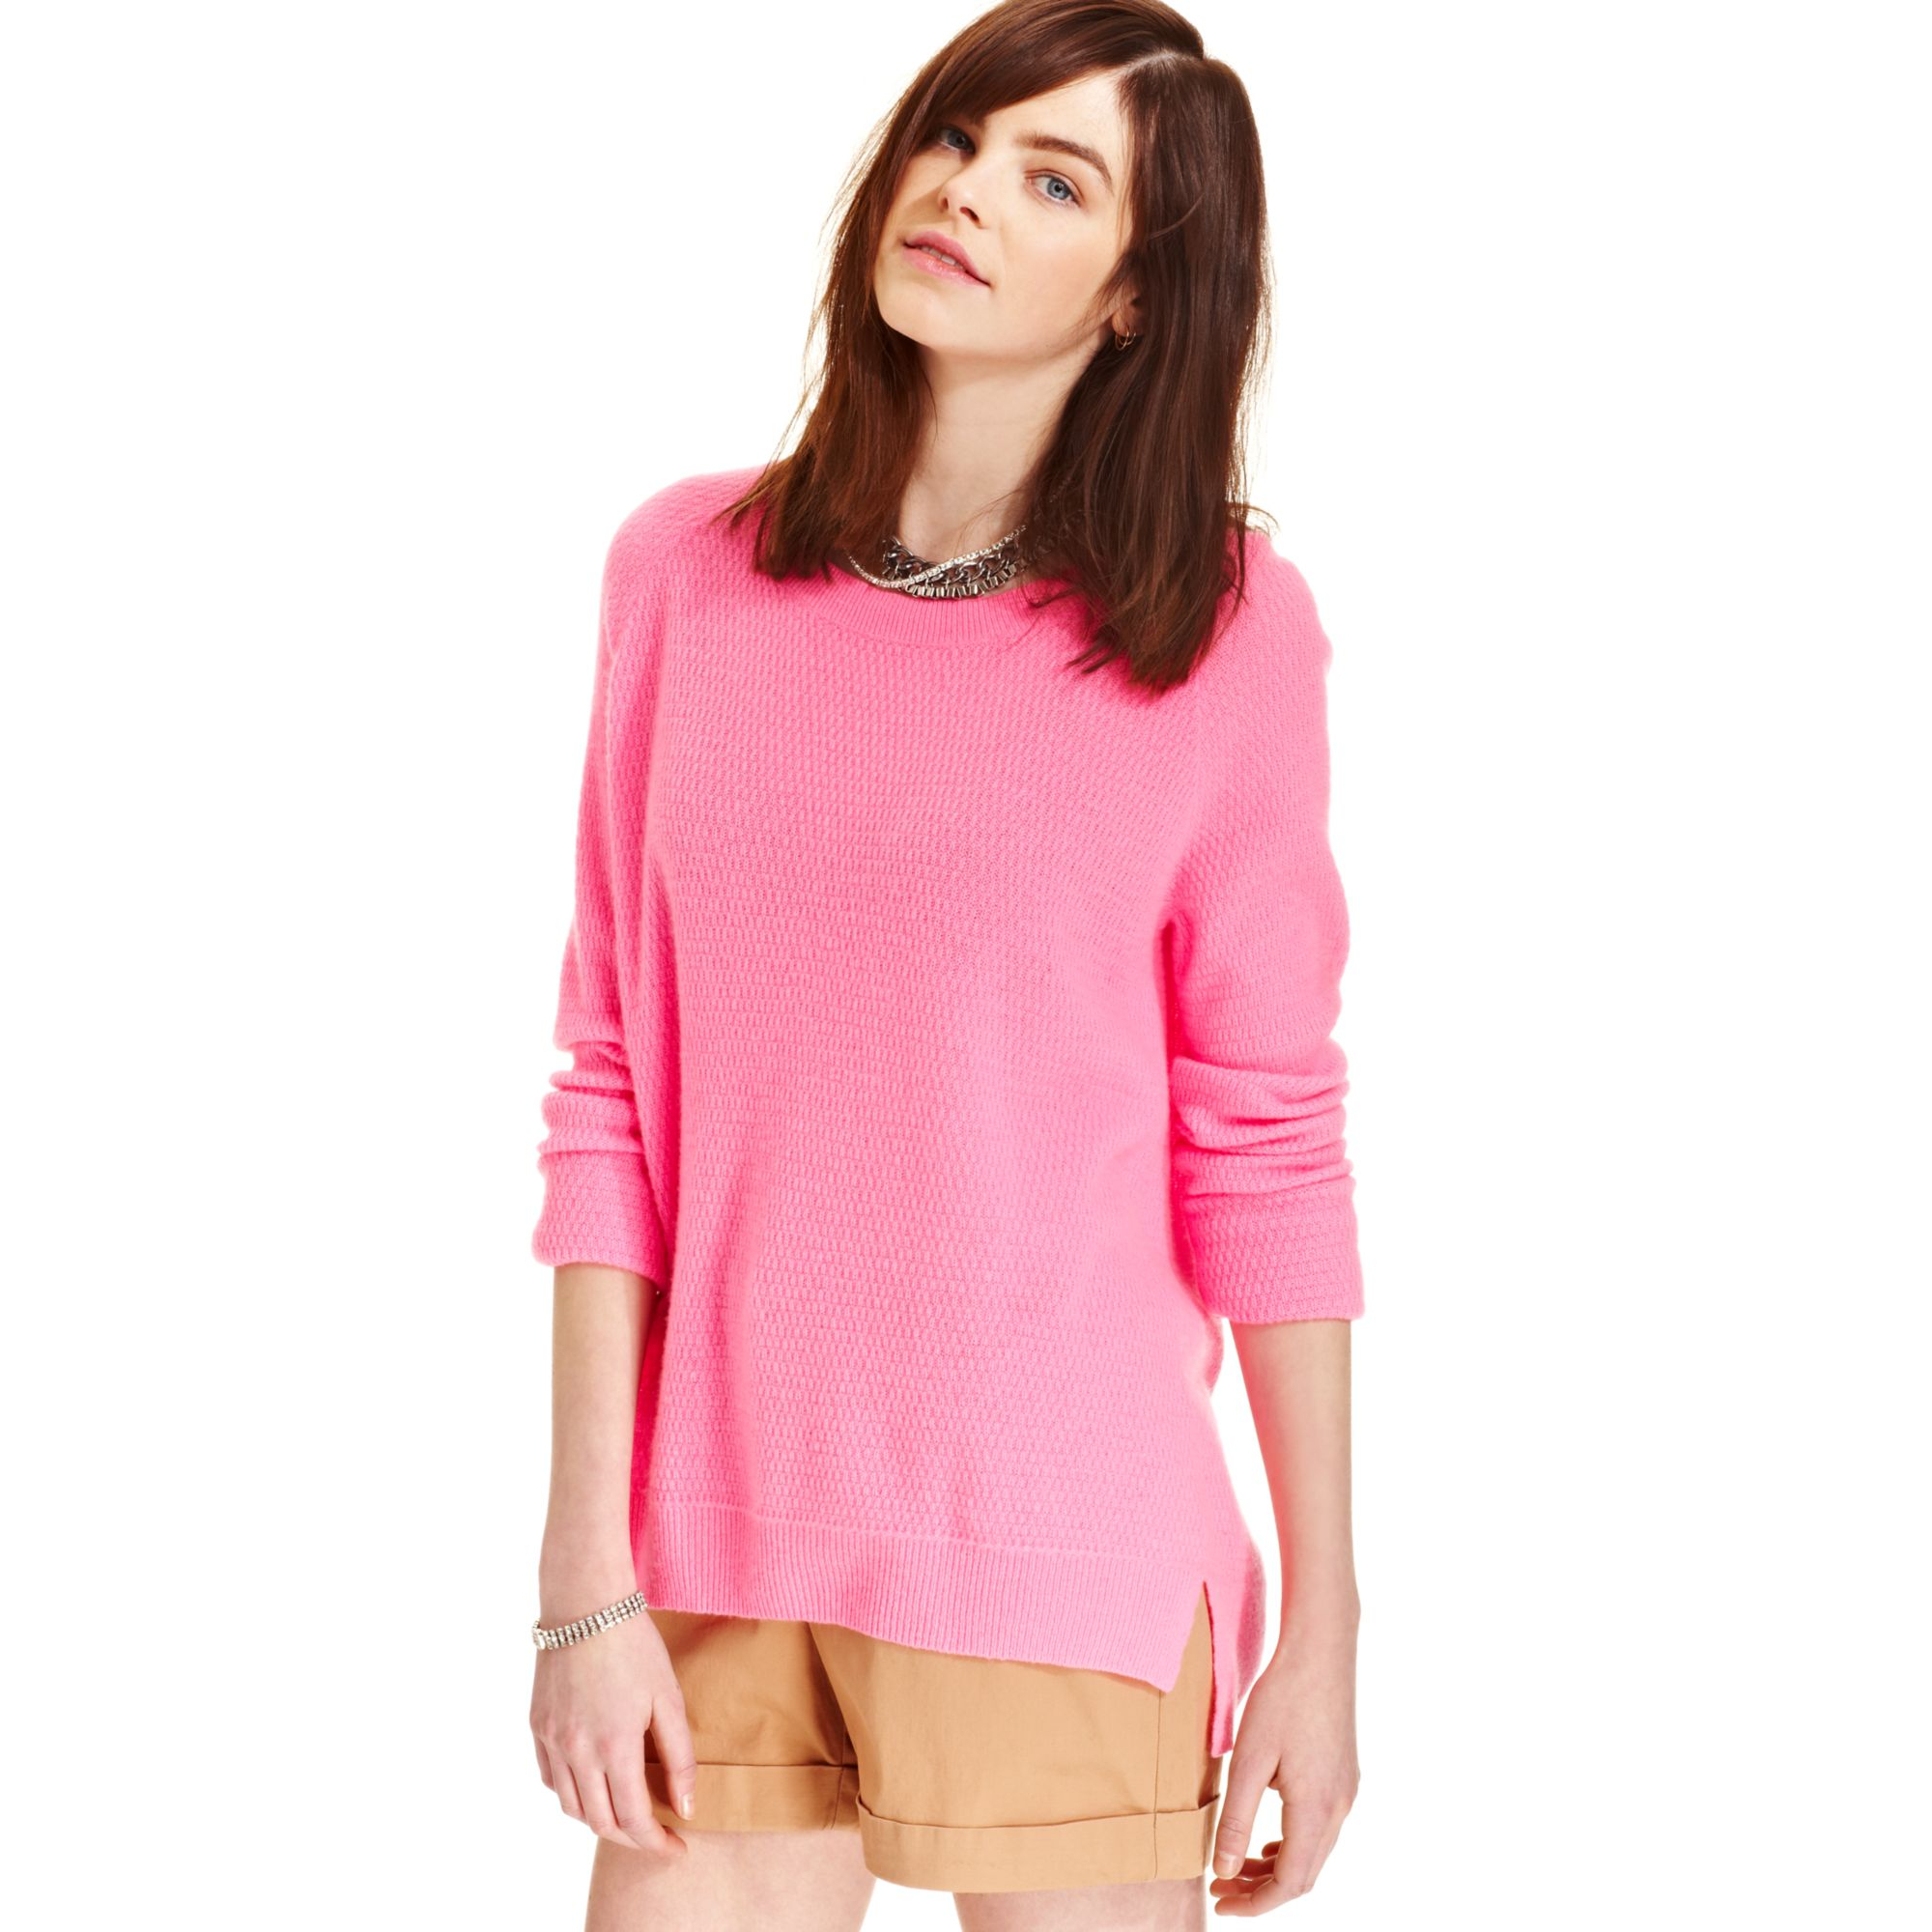 Maison Jules Textured Cashmere Sweater in Pink (Neon Pink) | Lyst